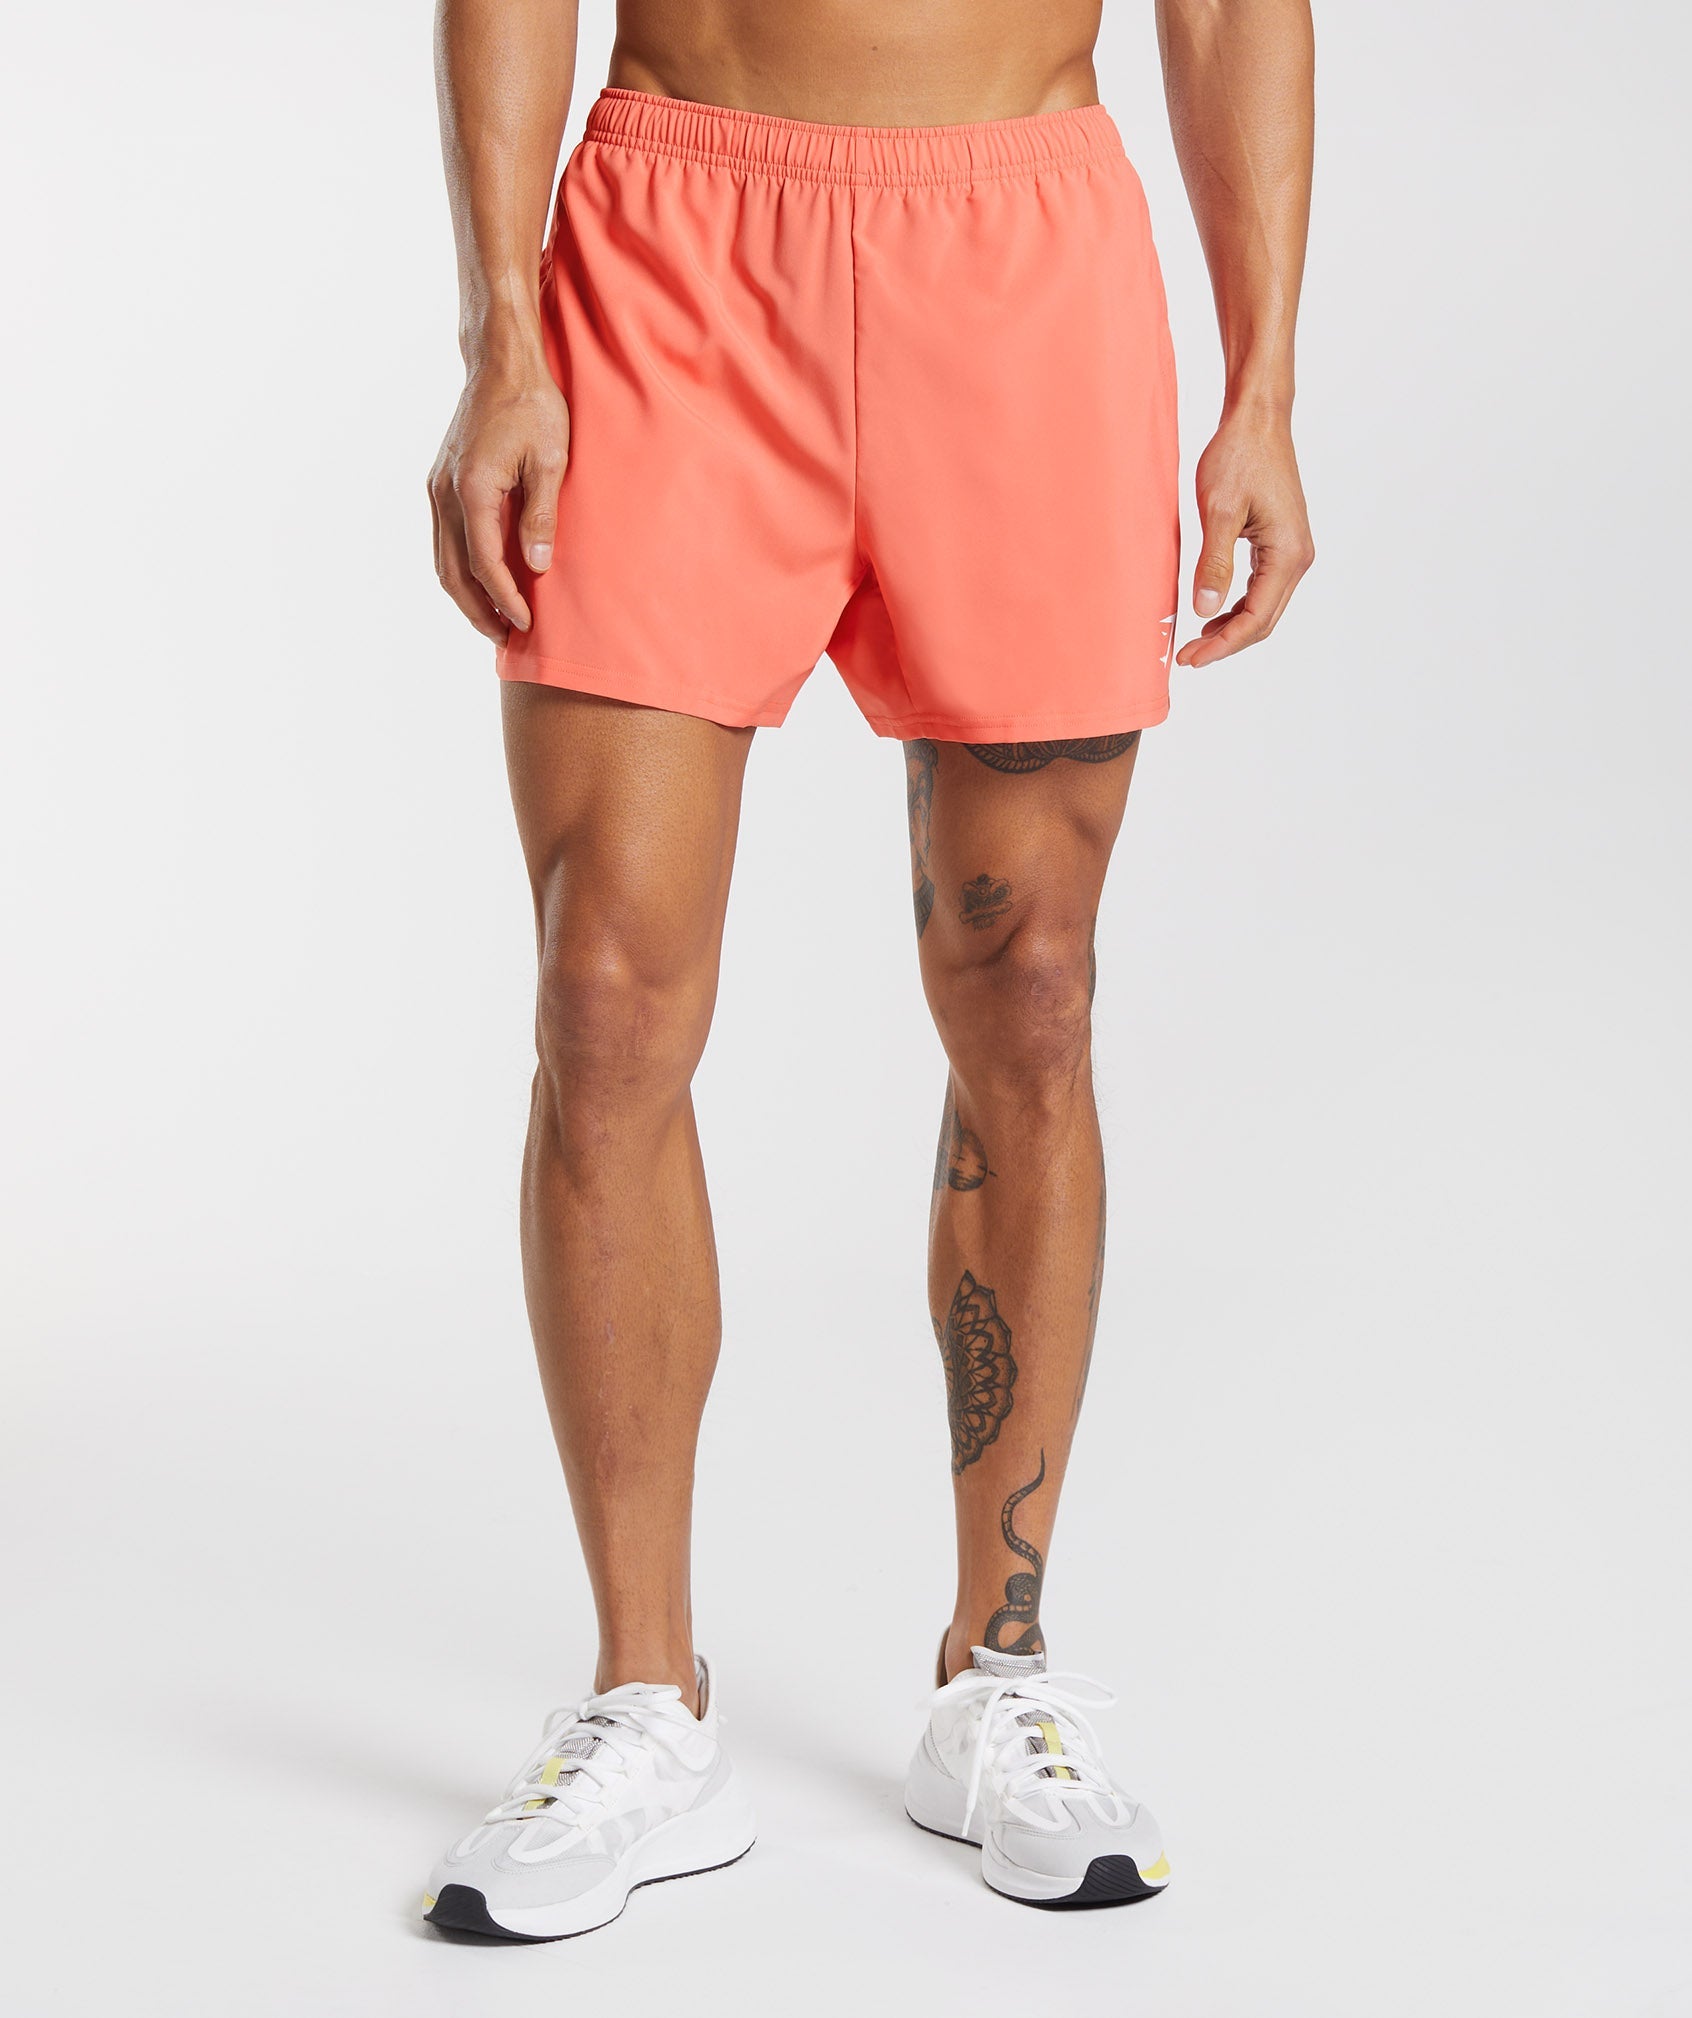 Arrival 5" Shorts in Aerospace Orange - view 1